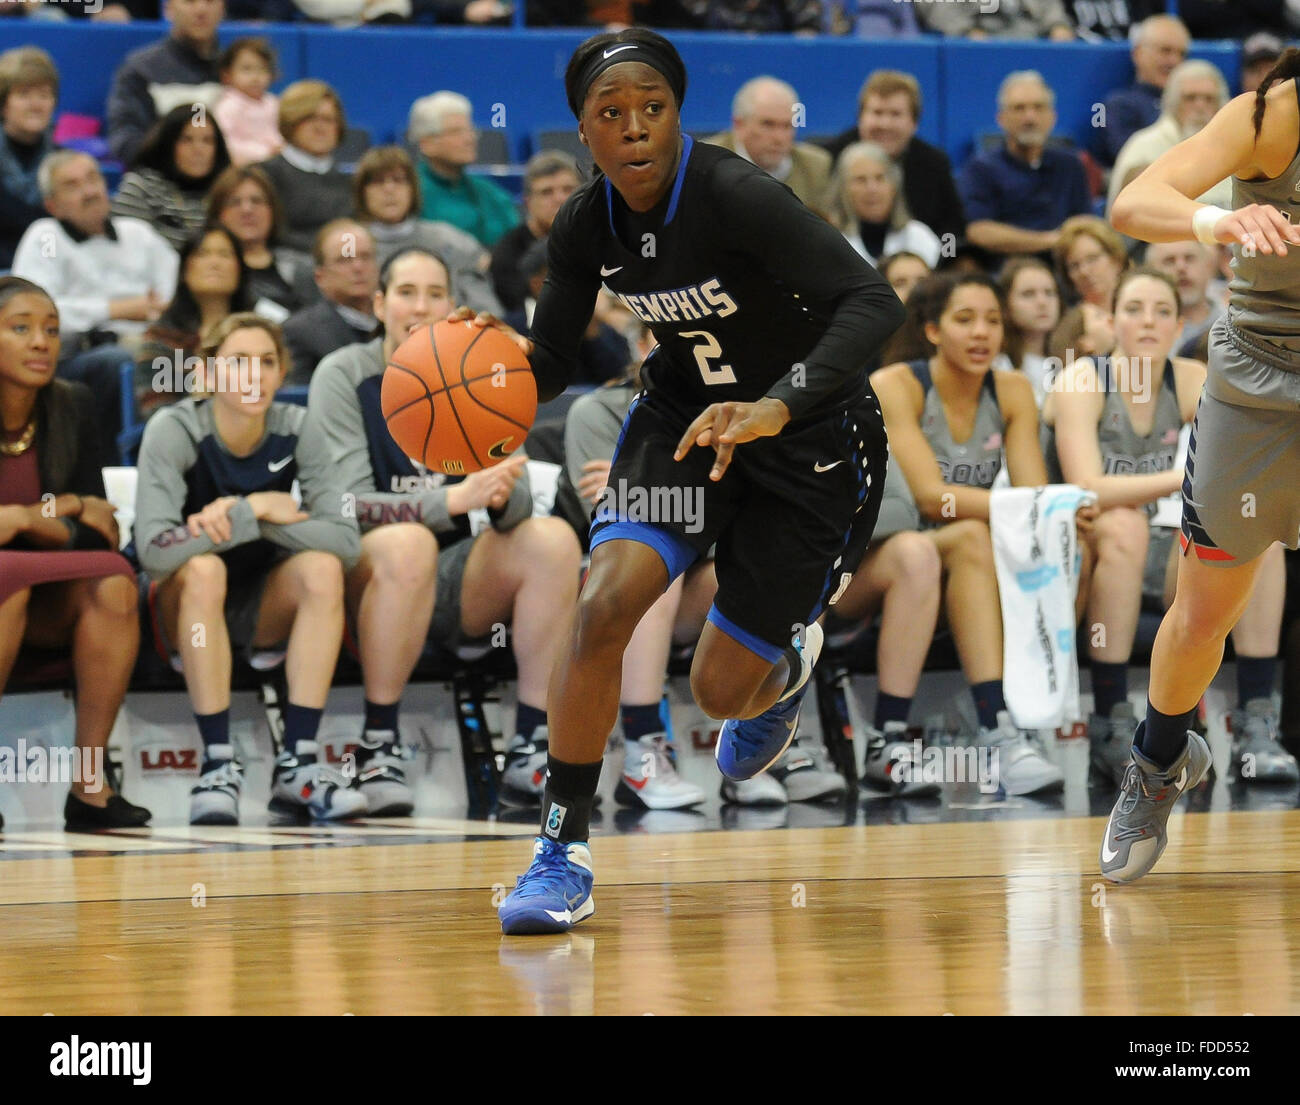 Hartford, CT, USA. 30th Jan, 2016. Loysha Morris (2) of the Memphis Tigers  in action during a game against the Uconn Huskies at the XL Center in  Hartford, CT. Gregory Vasil/CSM/Alamy Live